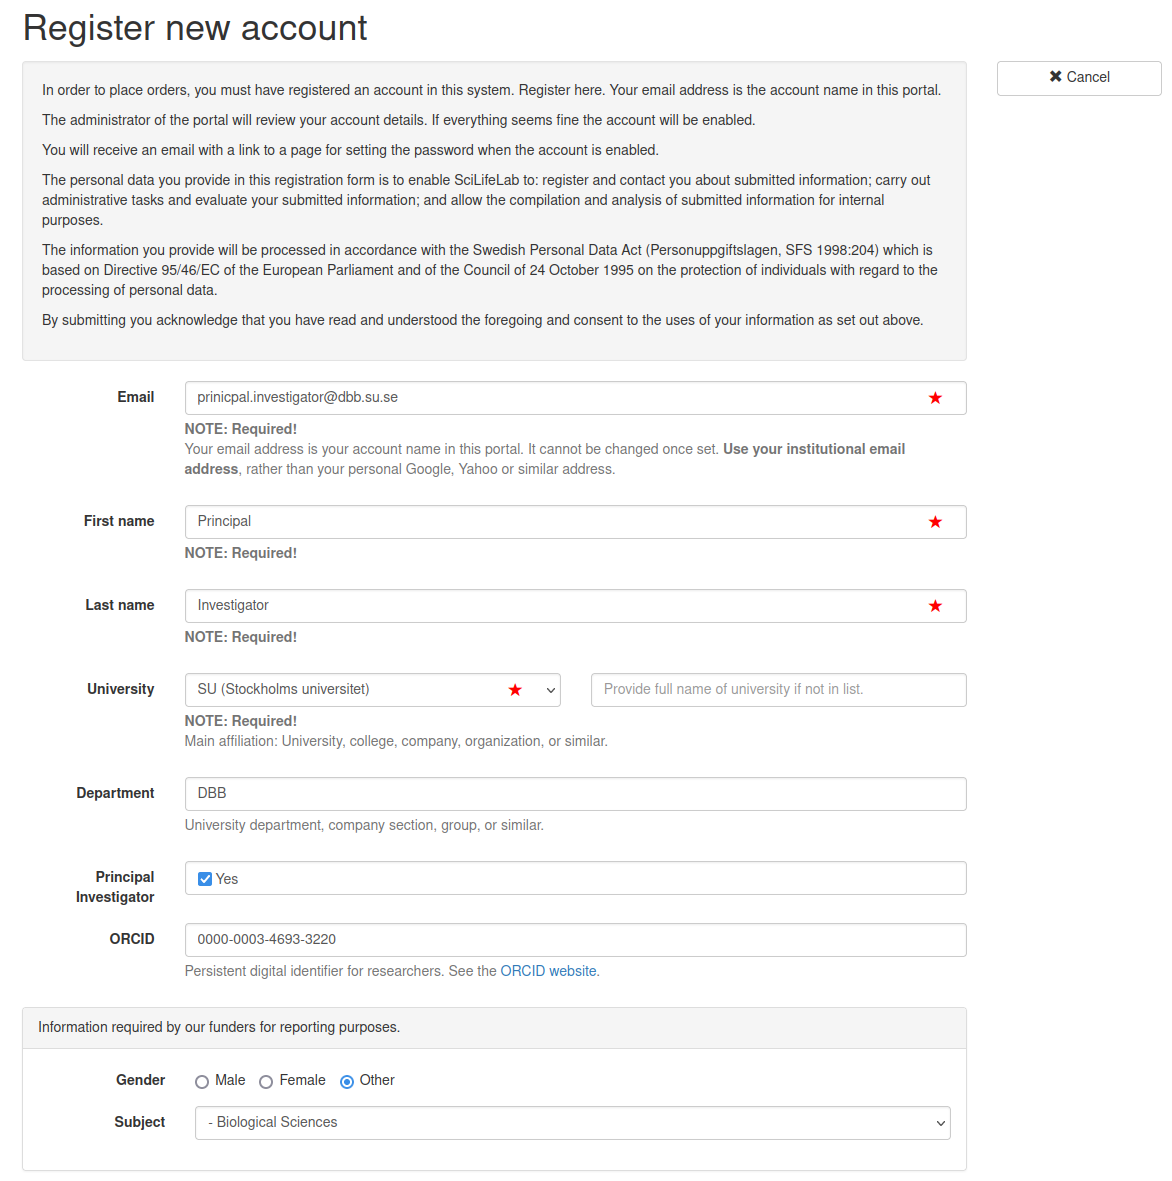 Second step in the Portal Guide for new users, showing a the first half of a properly filled out "Register new account" form for a new Principal Investigator.